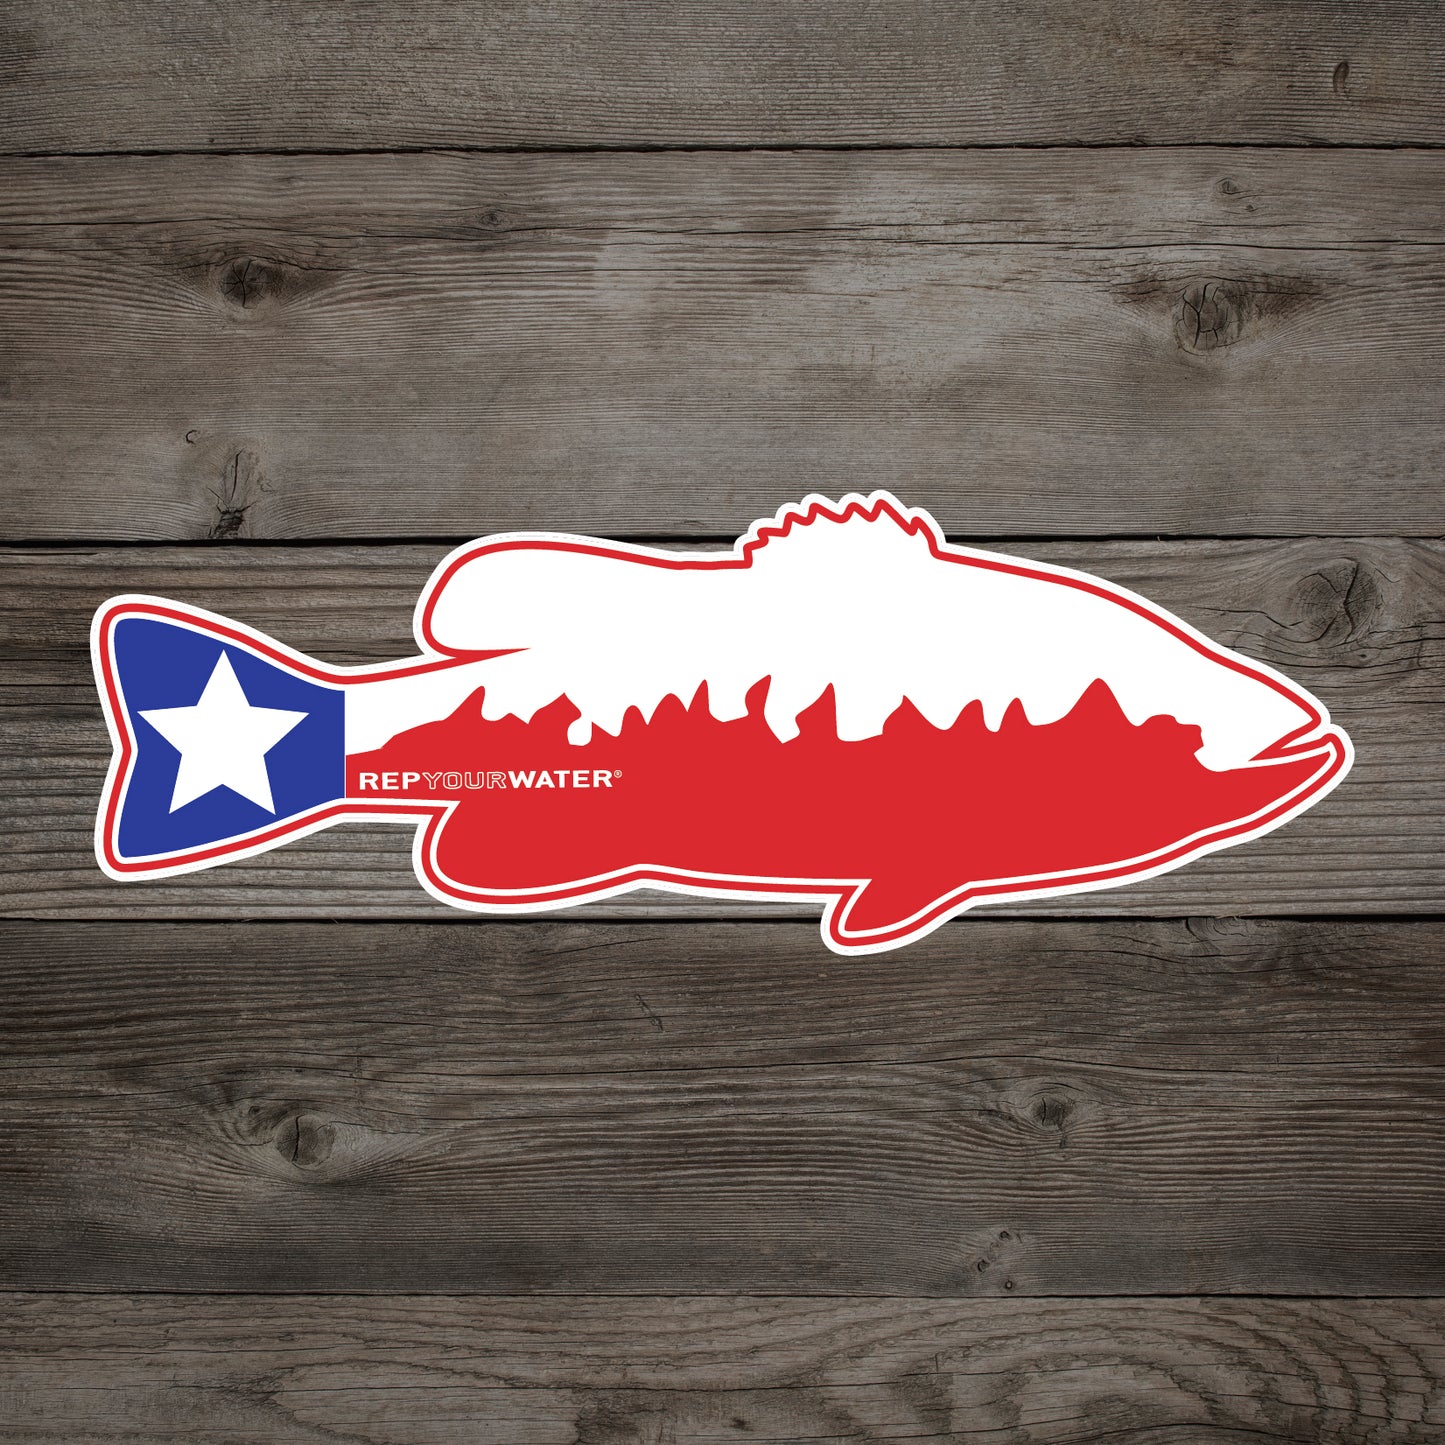 A sticker on a wood background features a bass in the colors and design of the texas flag